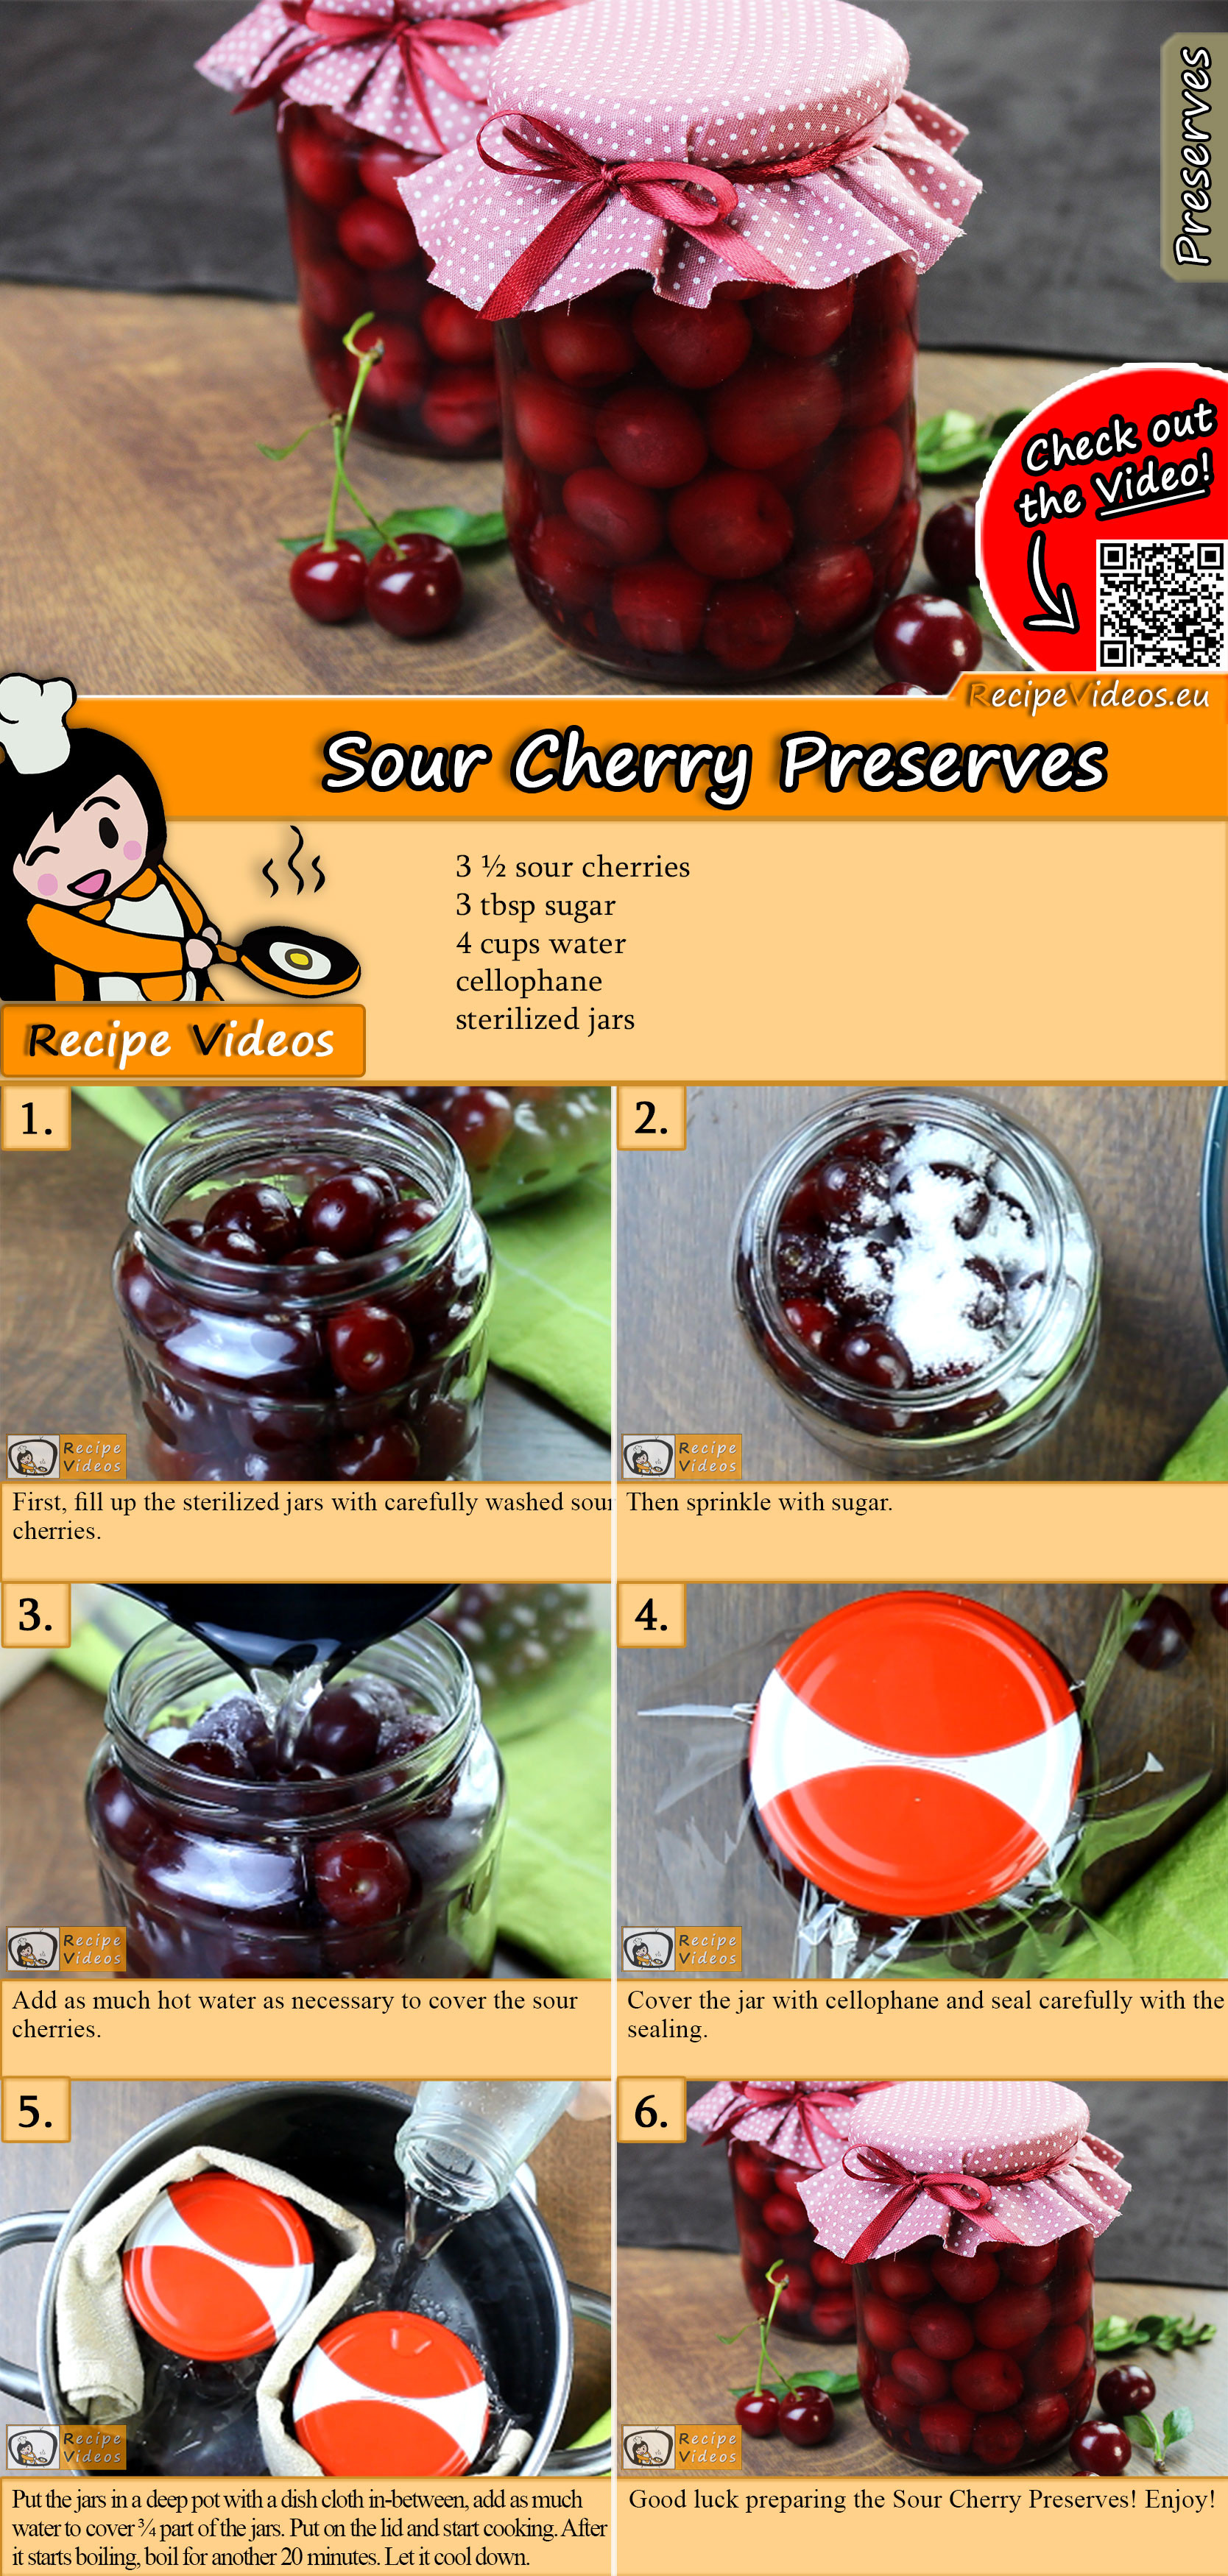 Sour cherry preserves recipe with video